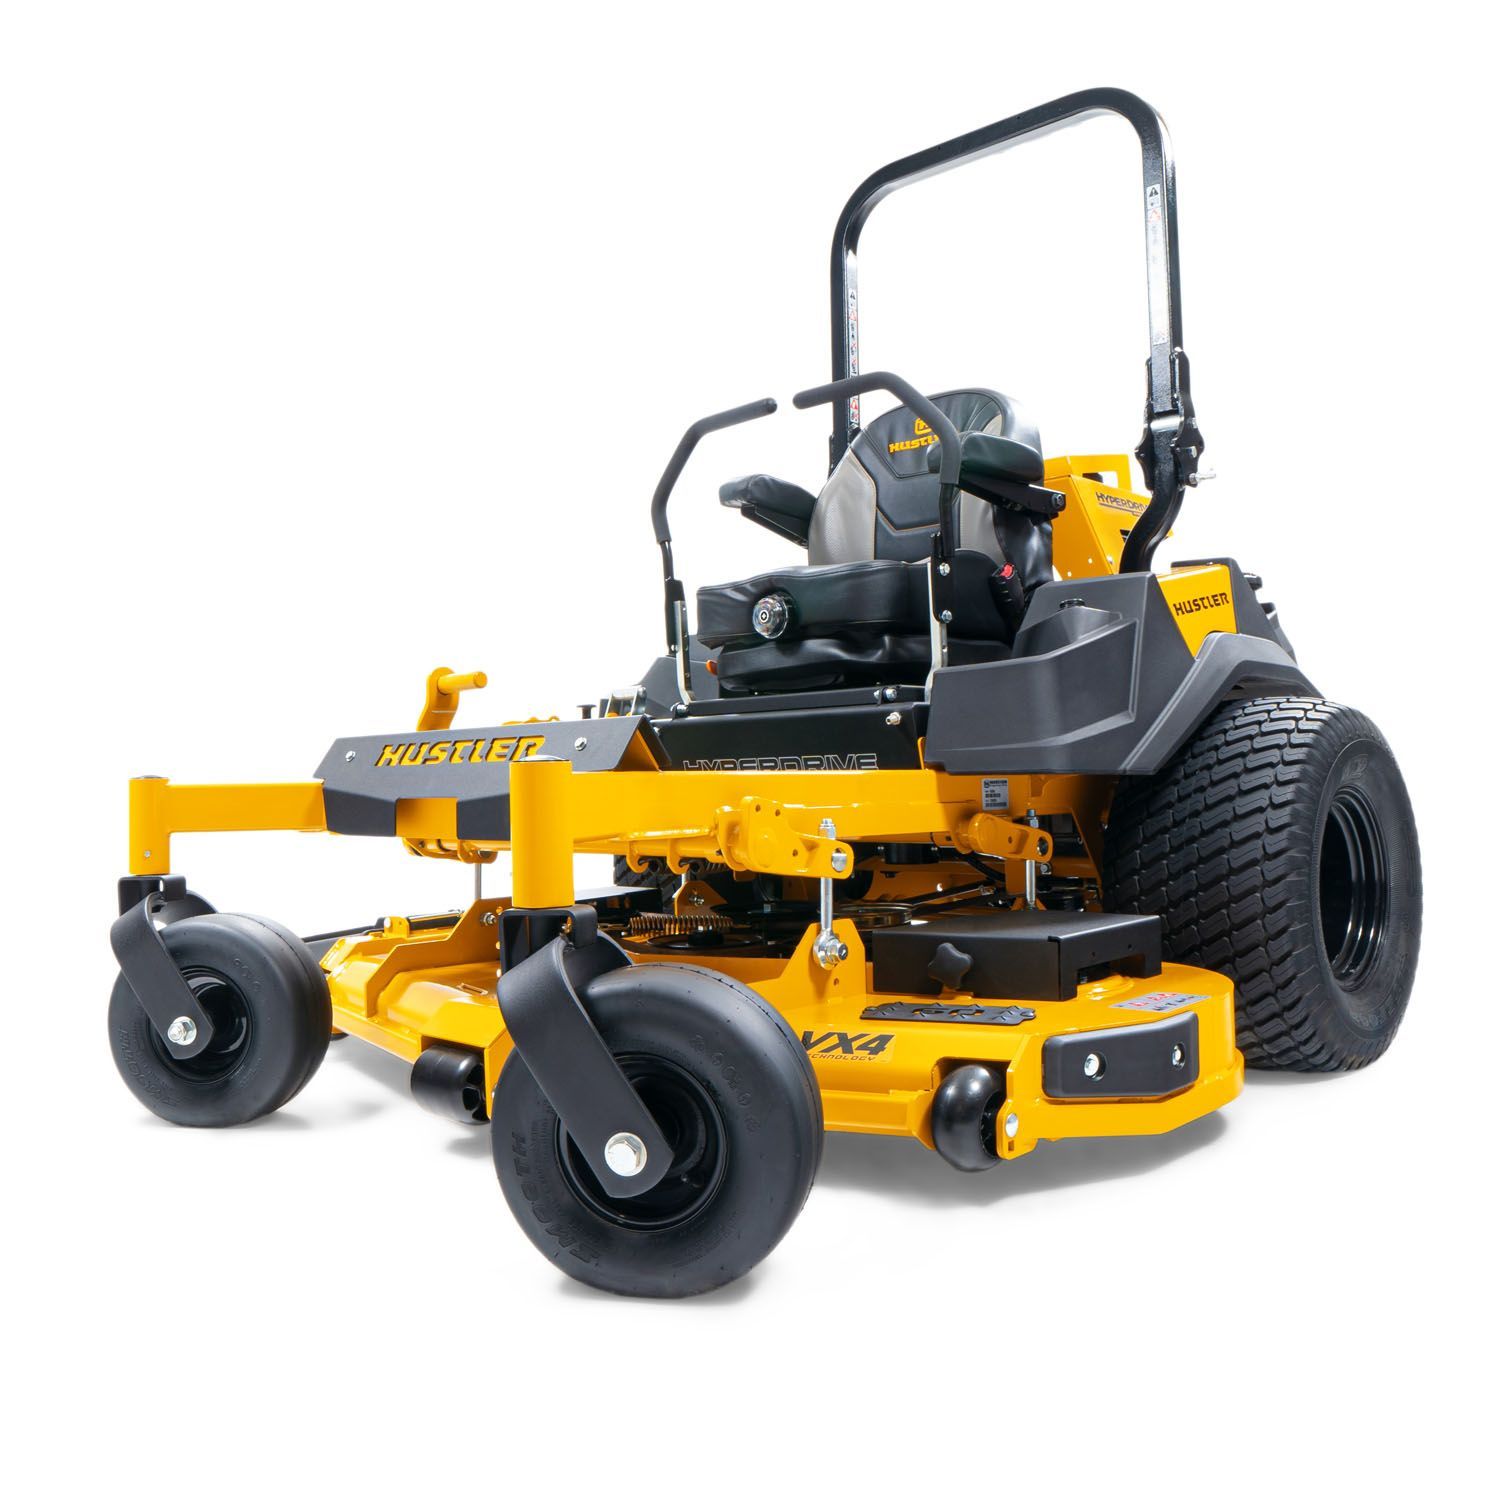 A yellow lawn mower with black wheels on a white background